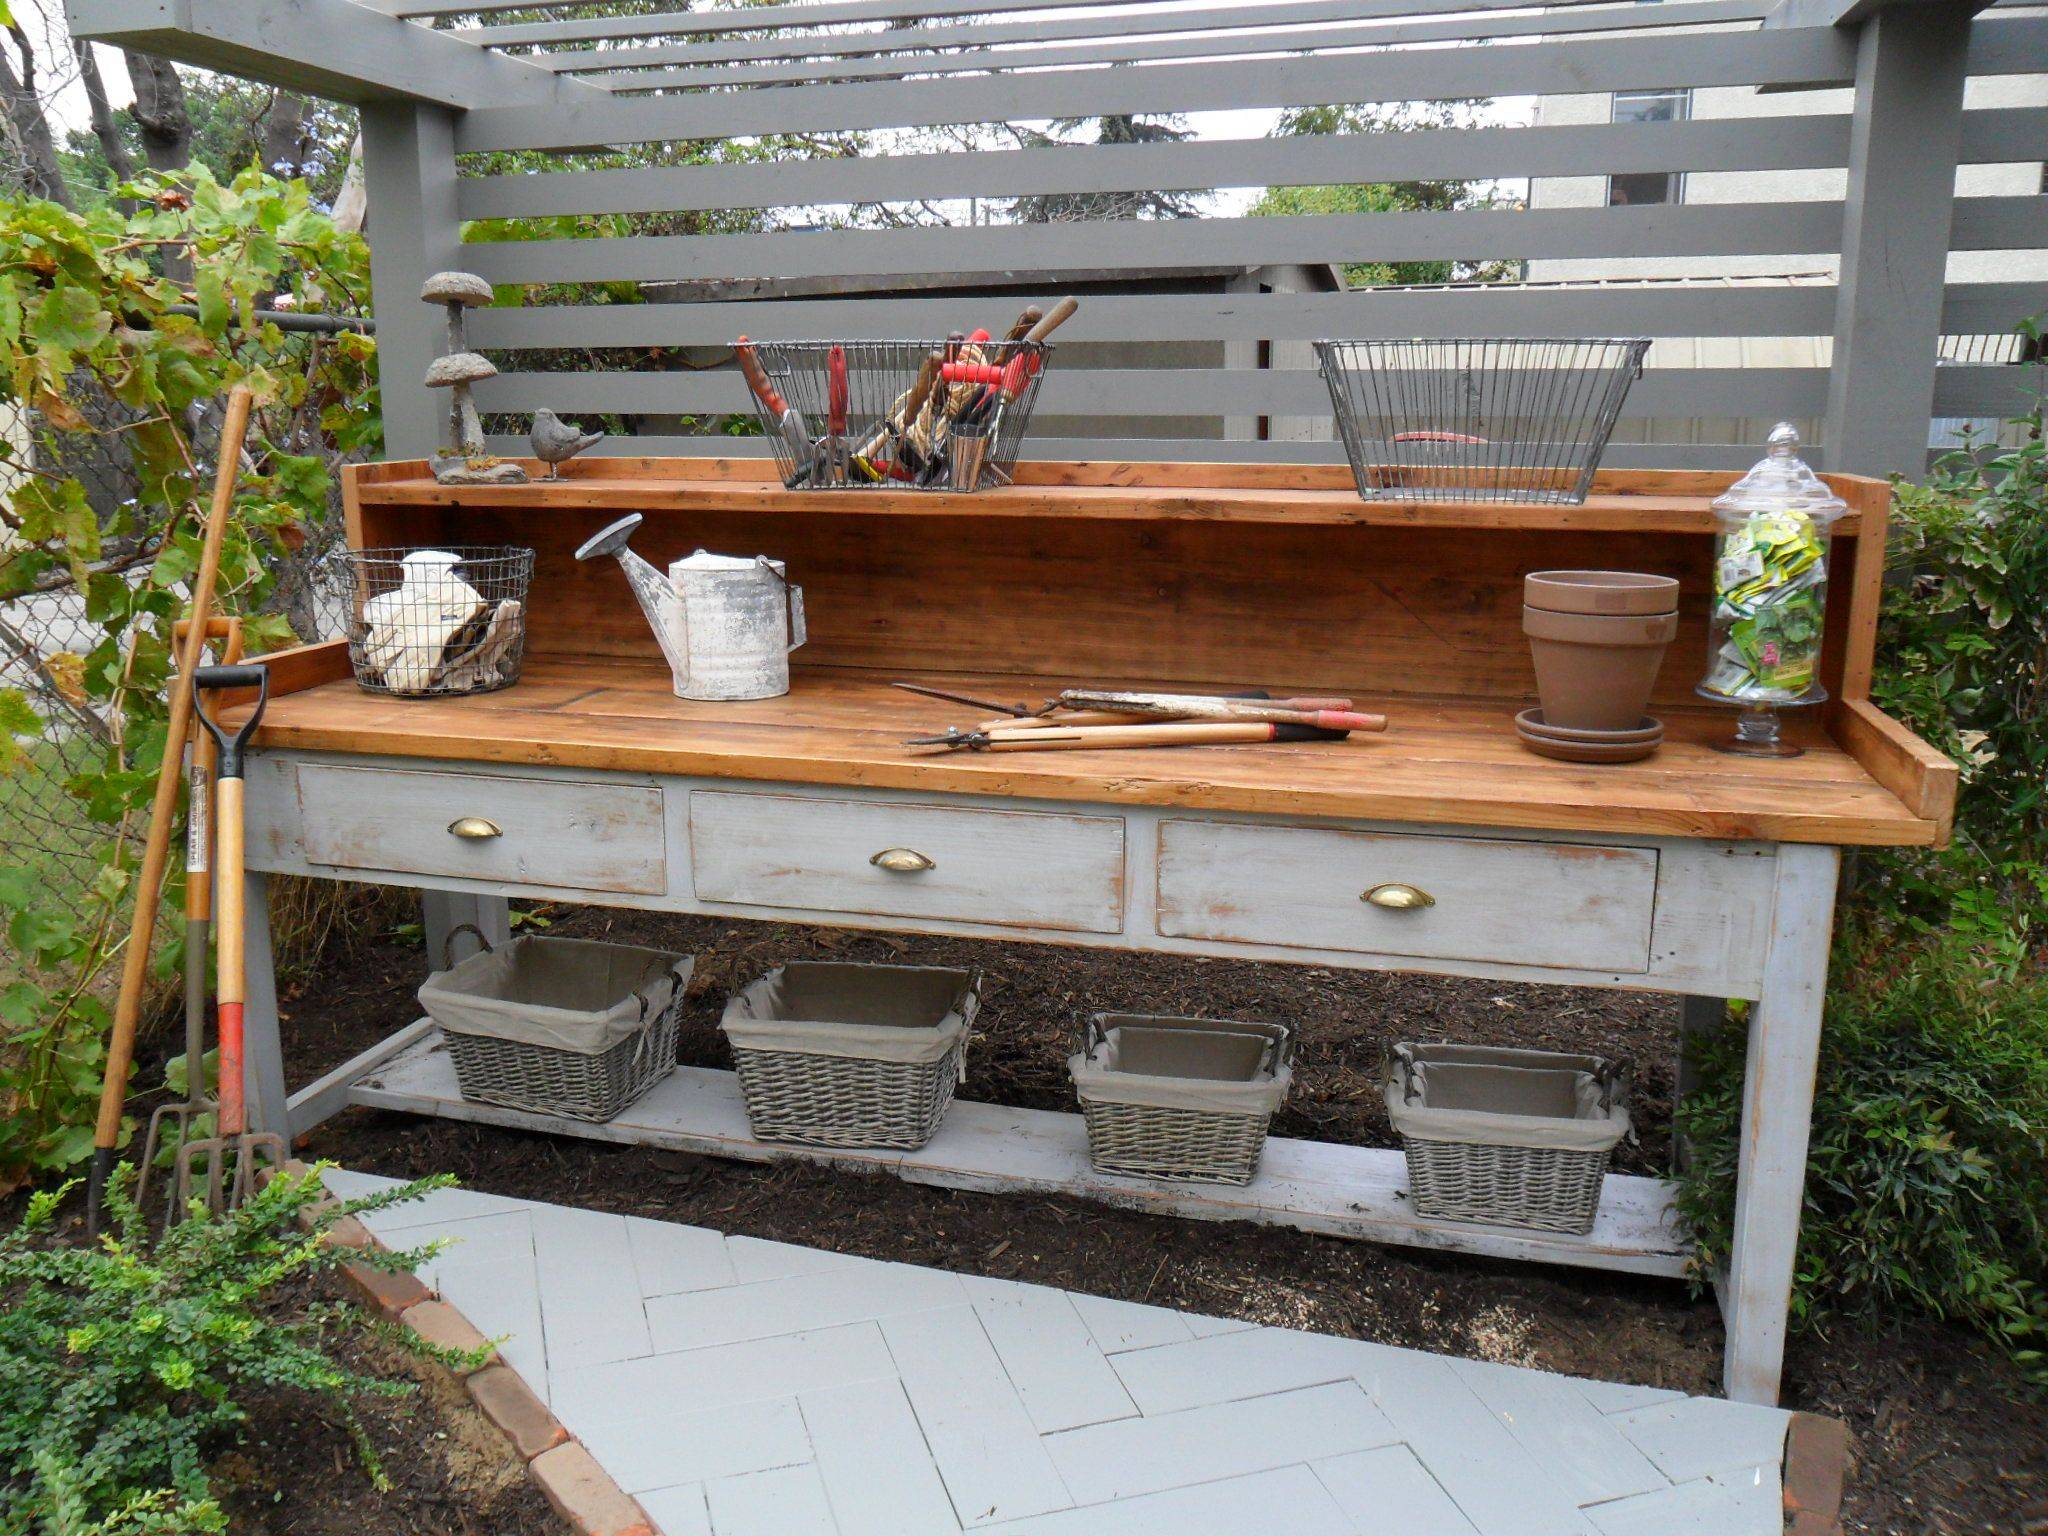 Awesome Diy Pallet Garden Bench And Storage Design Ideasawesome